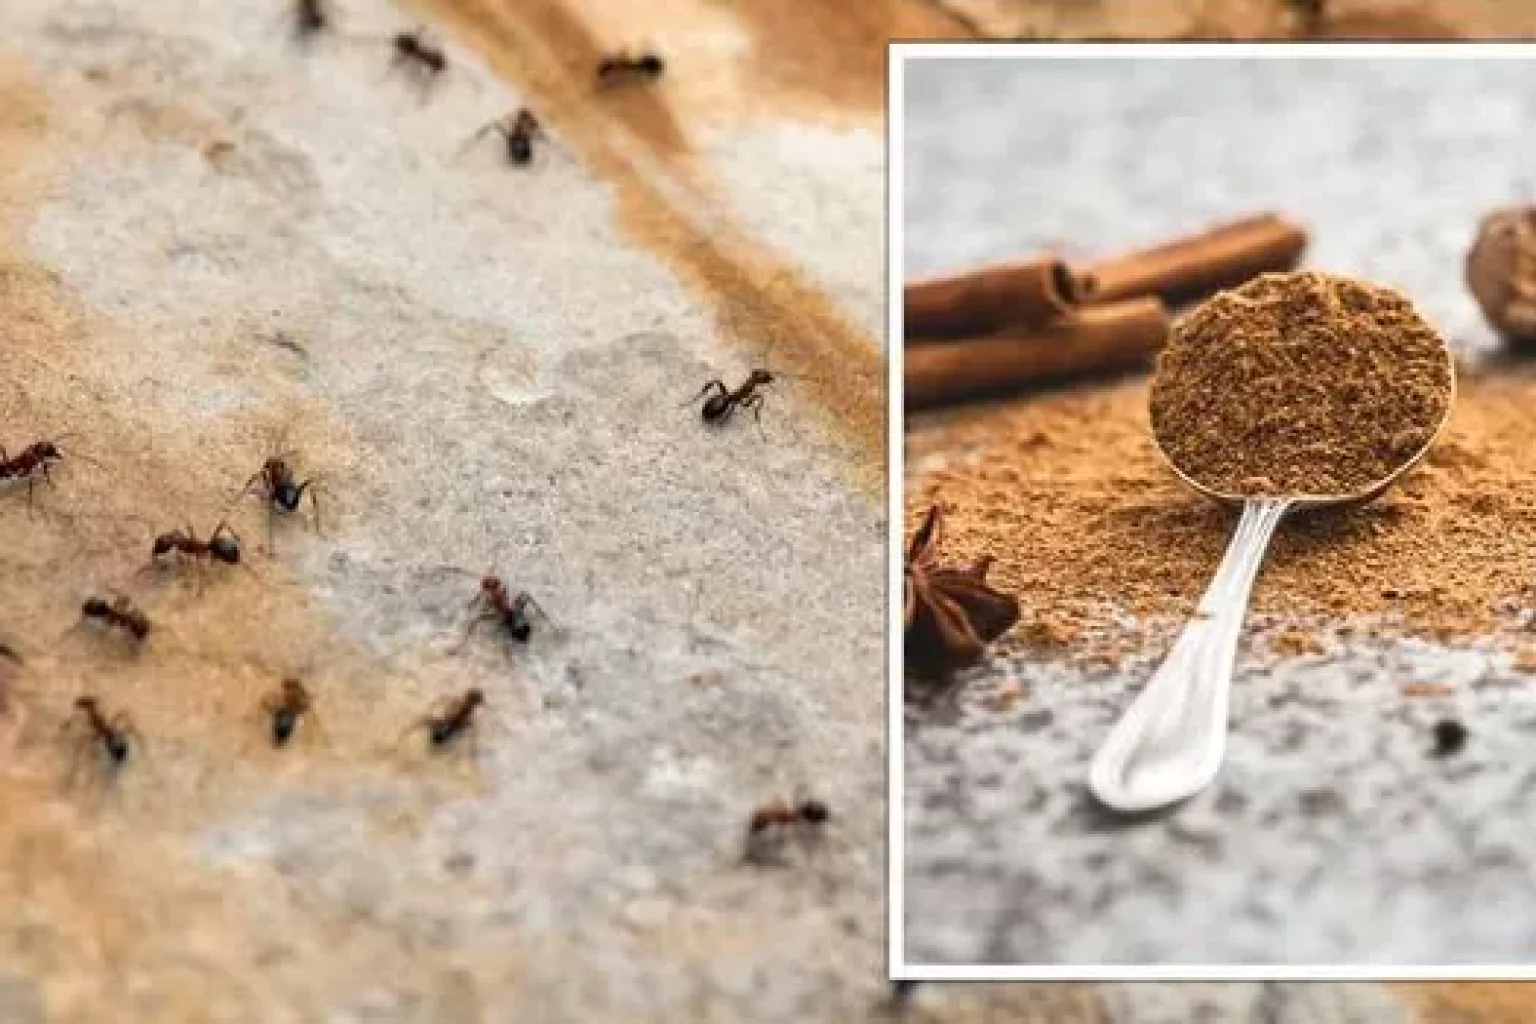 Cinnamon sticks laid out with ants around, demonstrating the use of cinnamon as an ant deterrent.